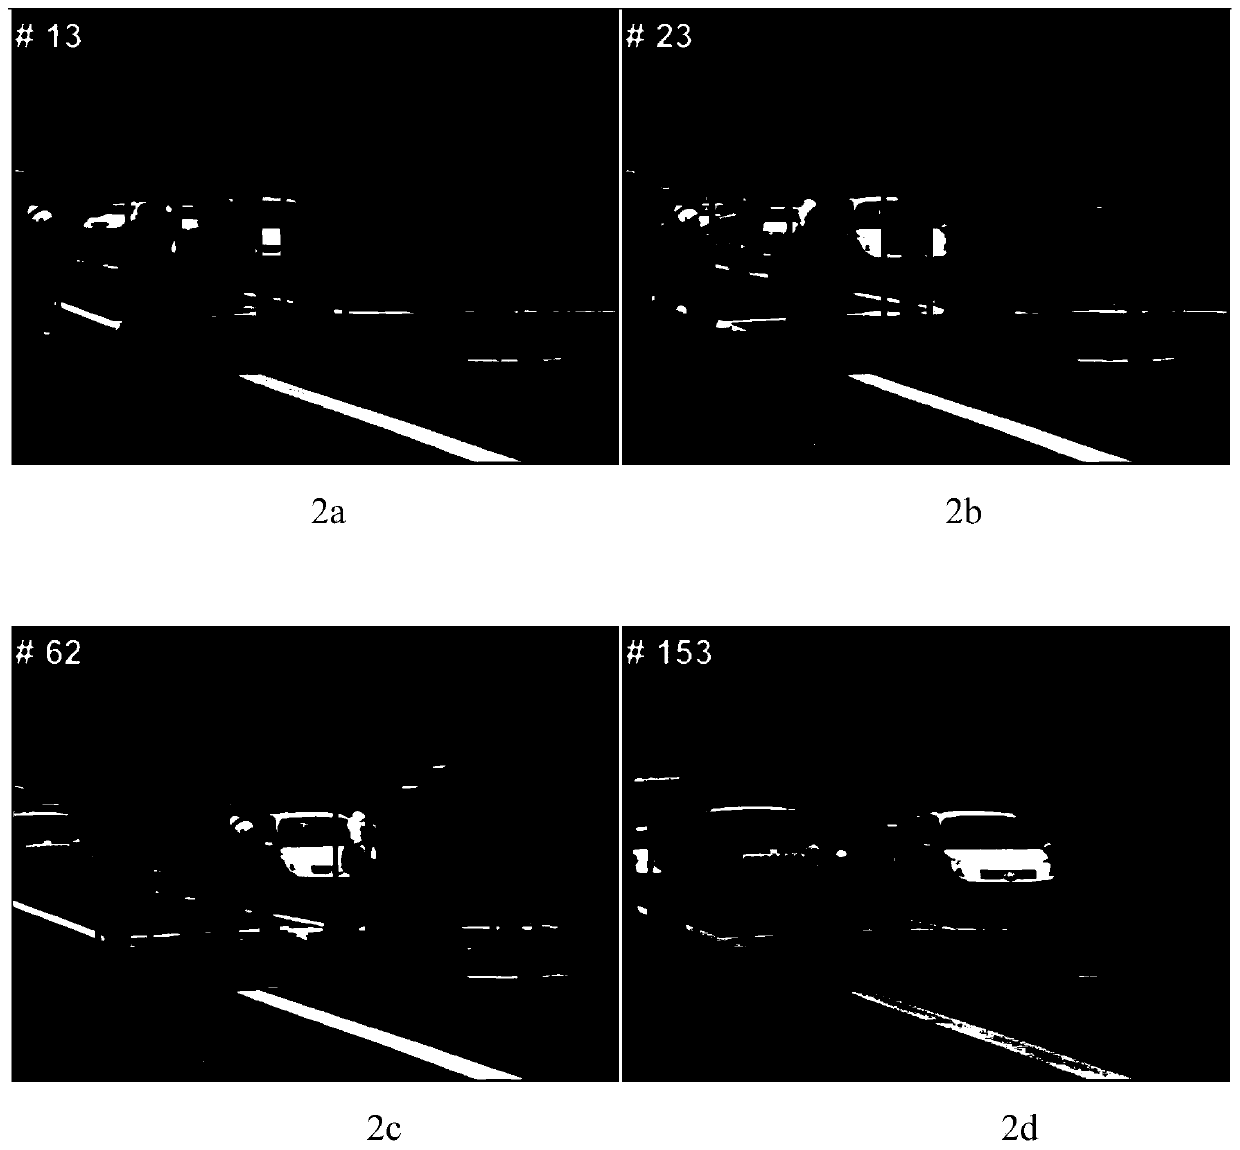 Multi-pedestrian tracking method based on iterative filtering and observation discrimination